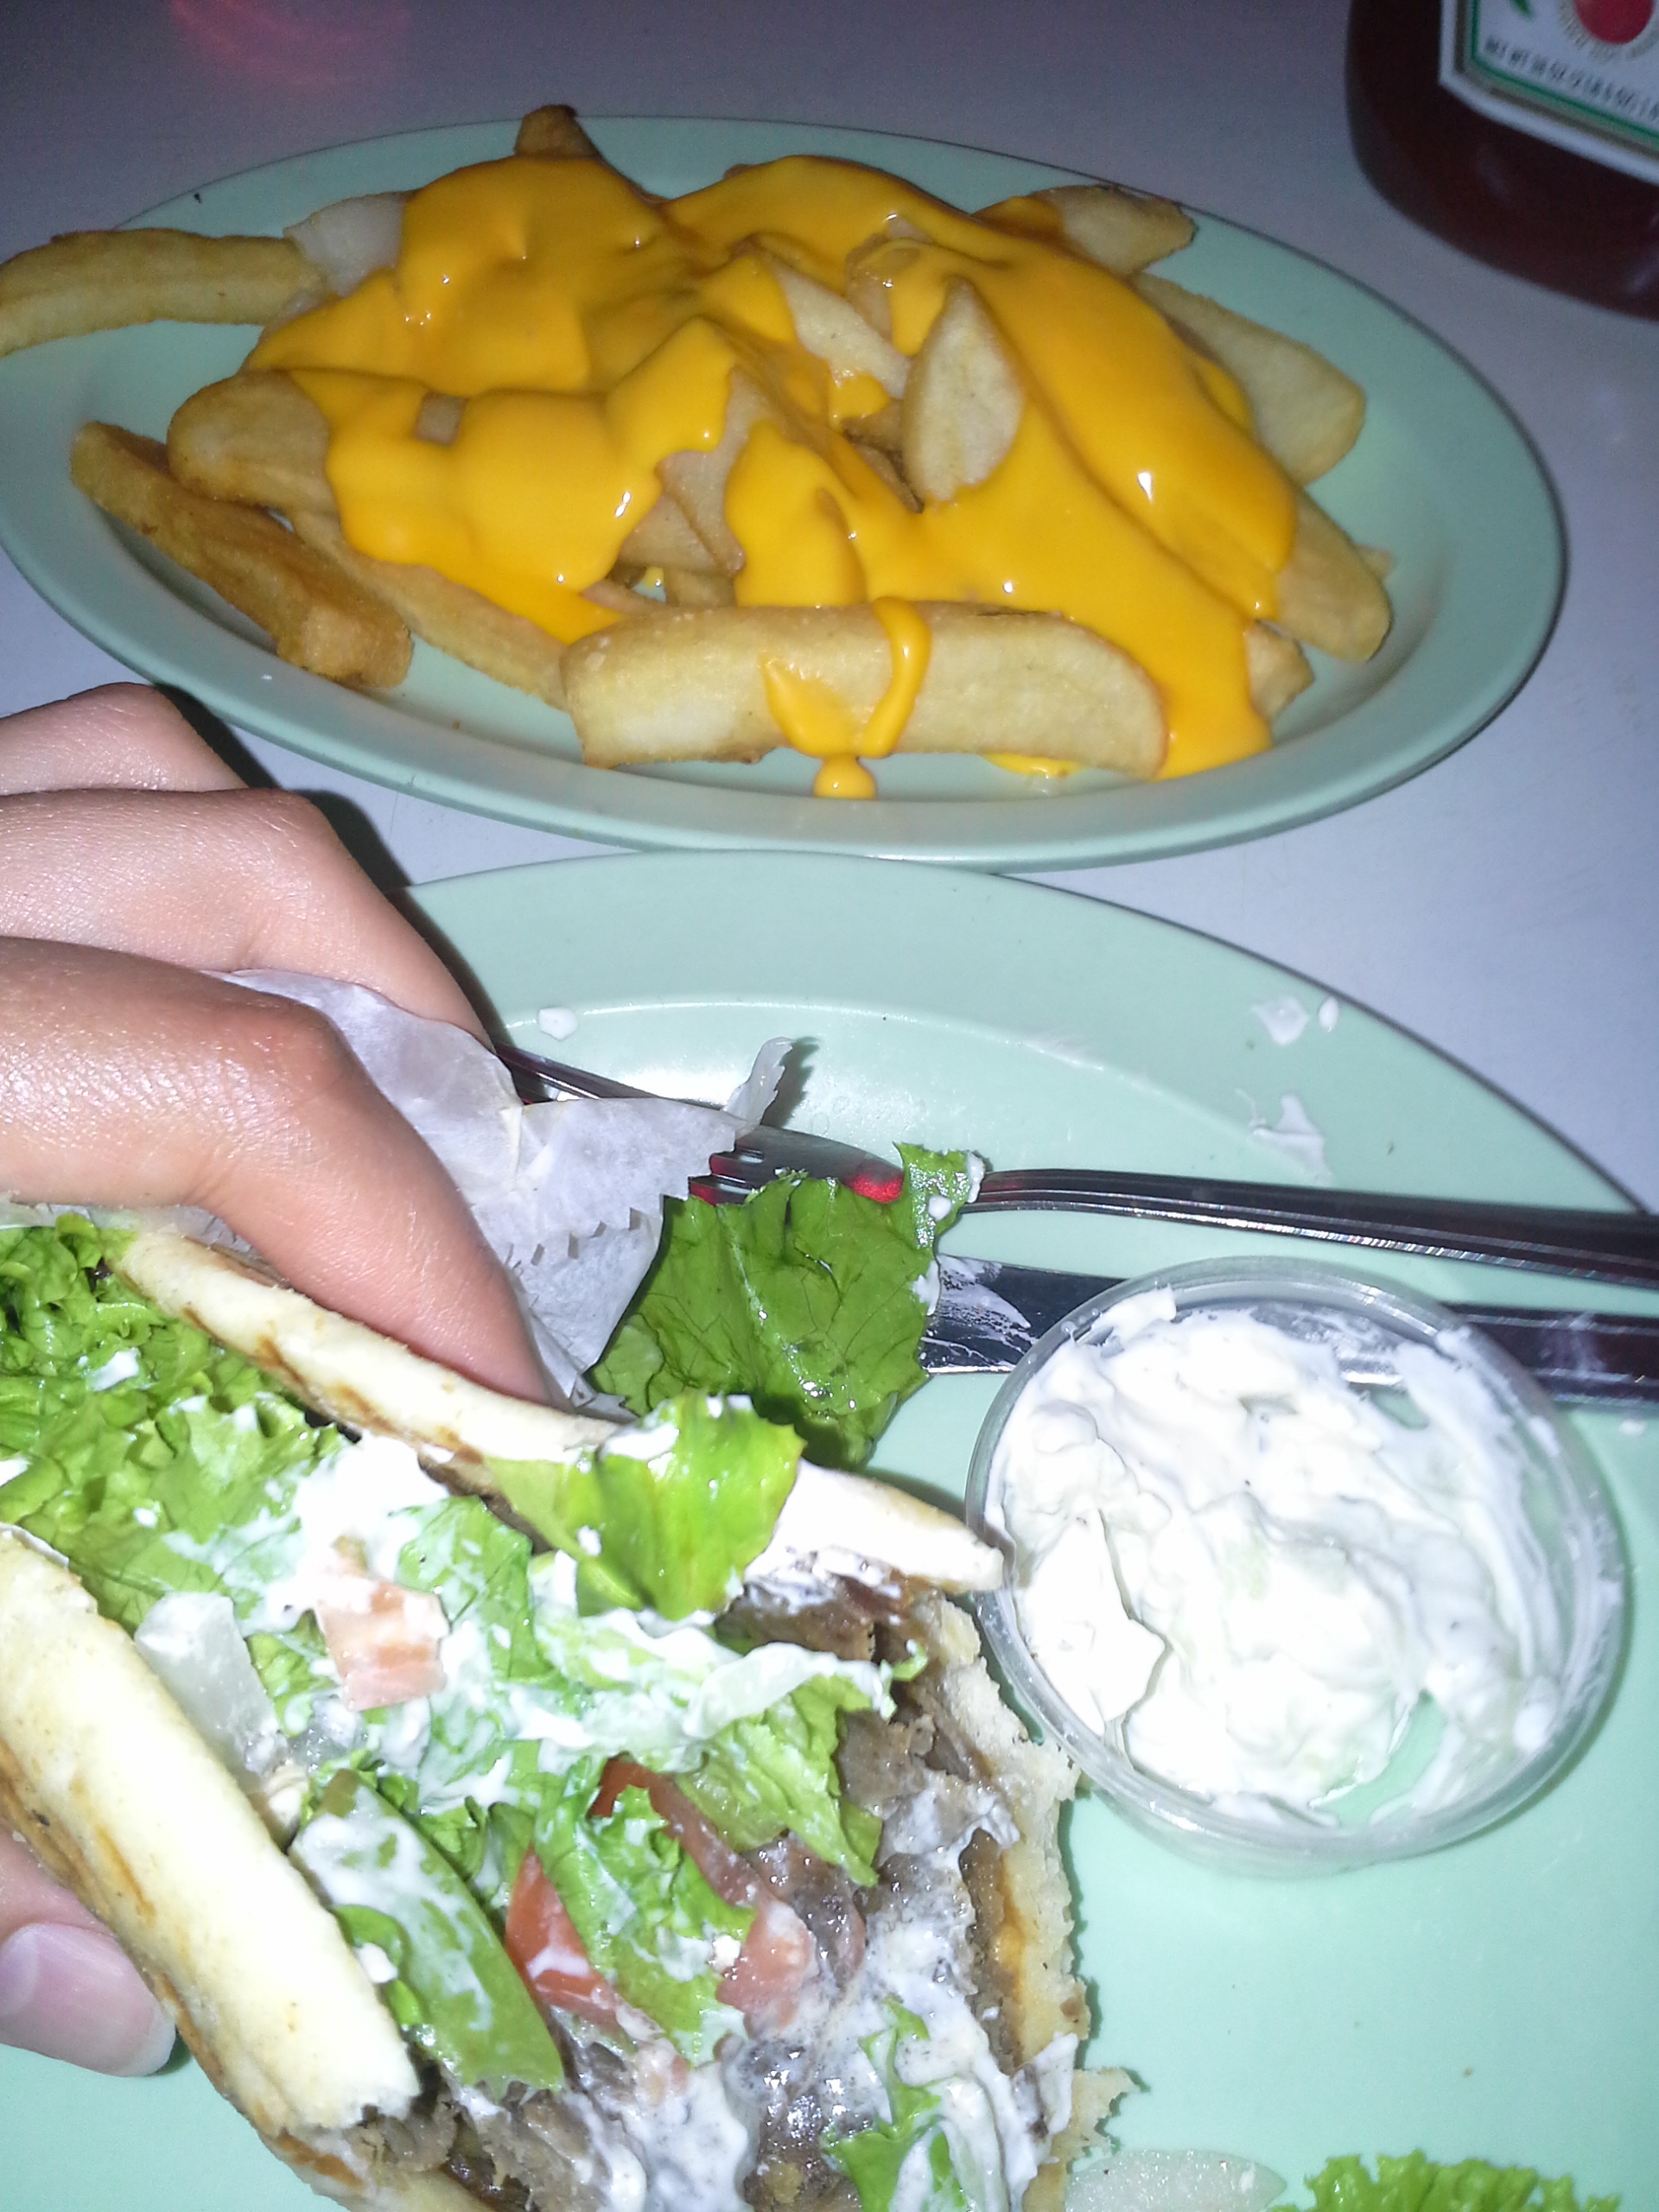 My final meal at Big Nick's Gyro and Cheese Fries (they ran out of onion rings)